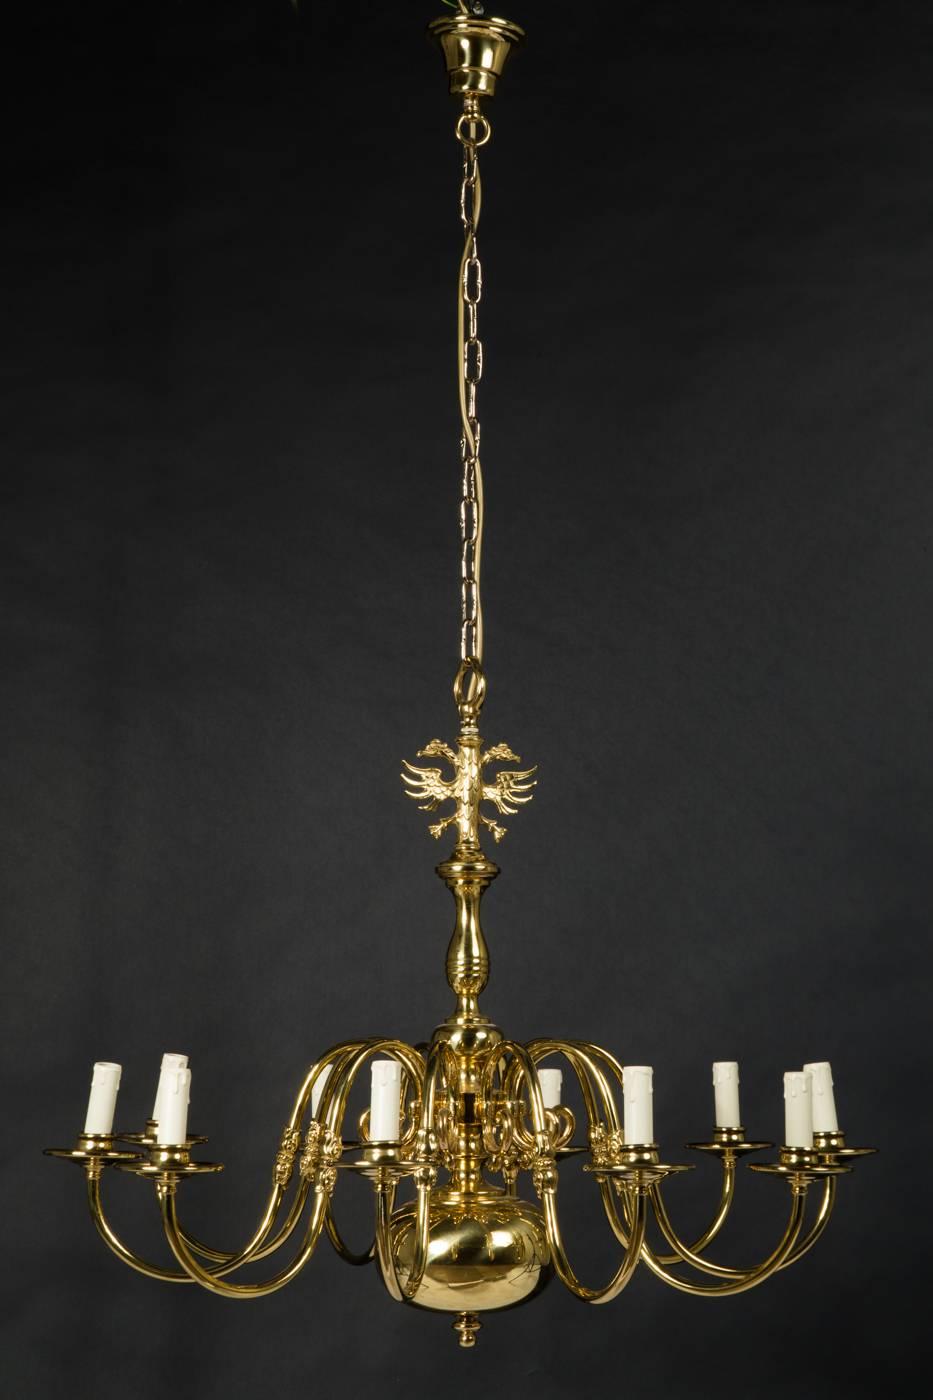 Chandelier in the style of a Flemish shank chandelier, made in 20th century in Austria, brass, polished, ten arms, S-shaped curved arms fitted with E14 sockets.

 